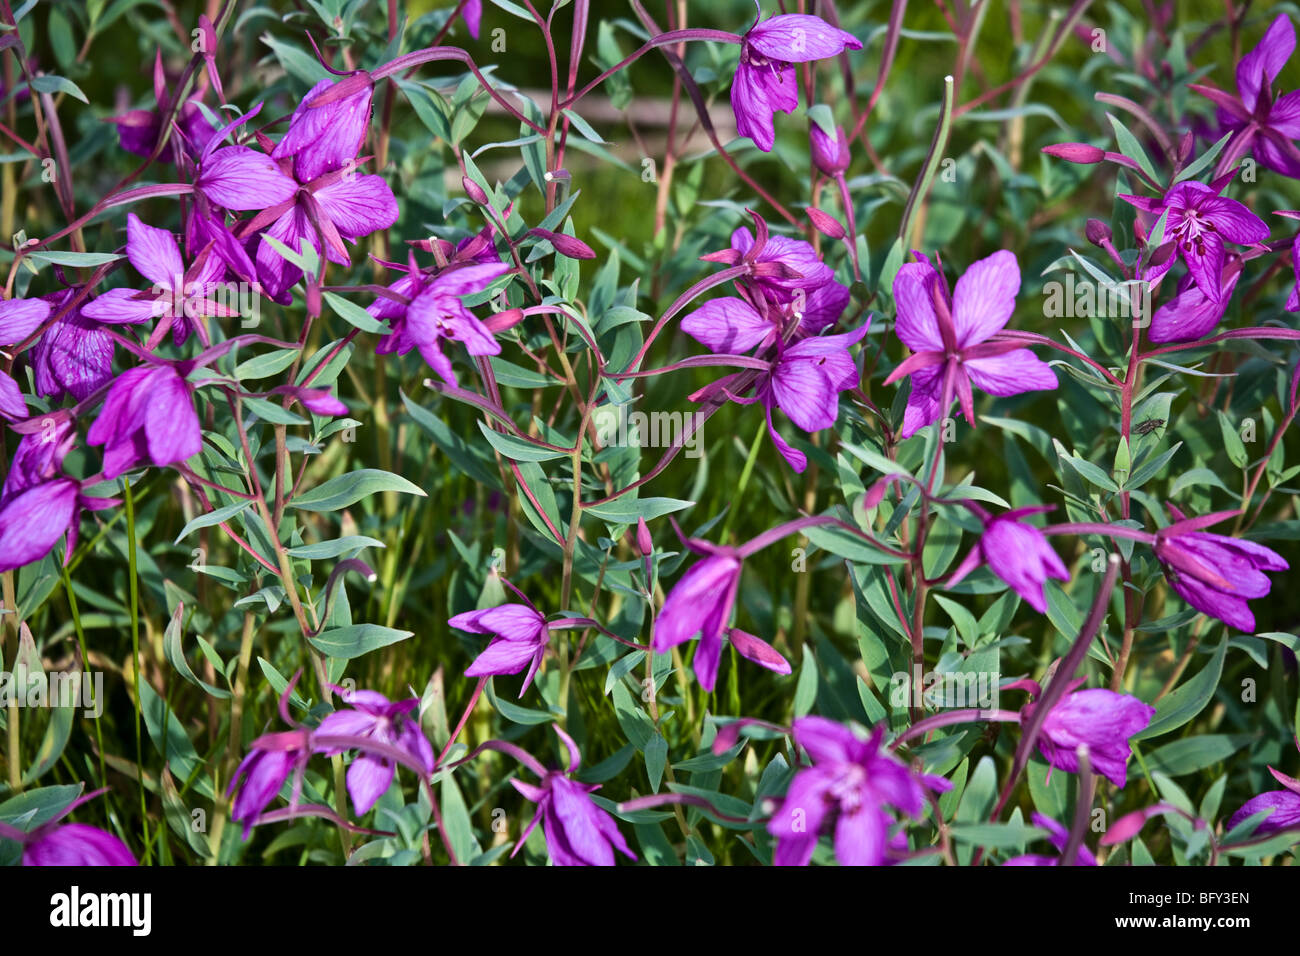 Greenland's national flower is the broad-leaved willowherb. Sisimiut, Greenland. Stock Photo